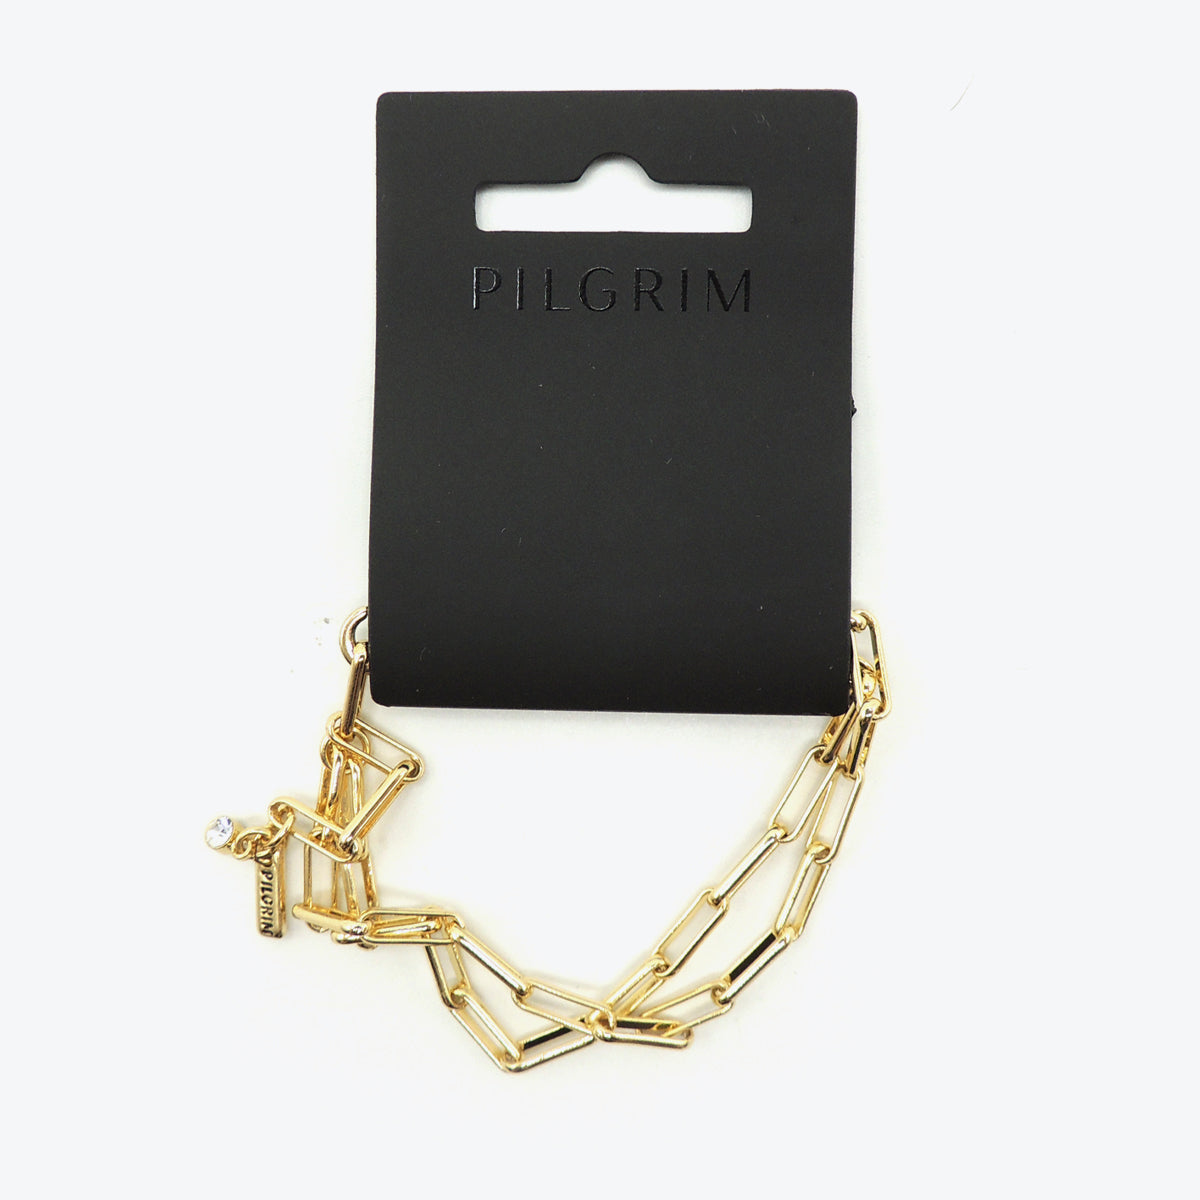 Pilgrim Serenity Square Cable Chain Bracelet Gold Plated